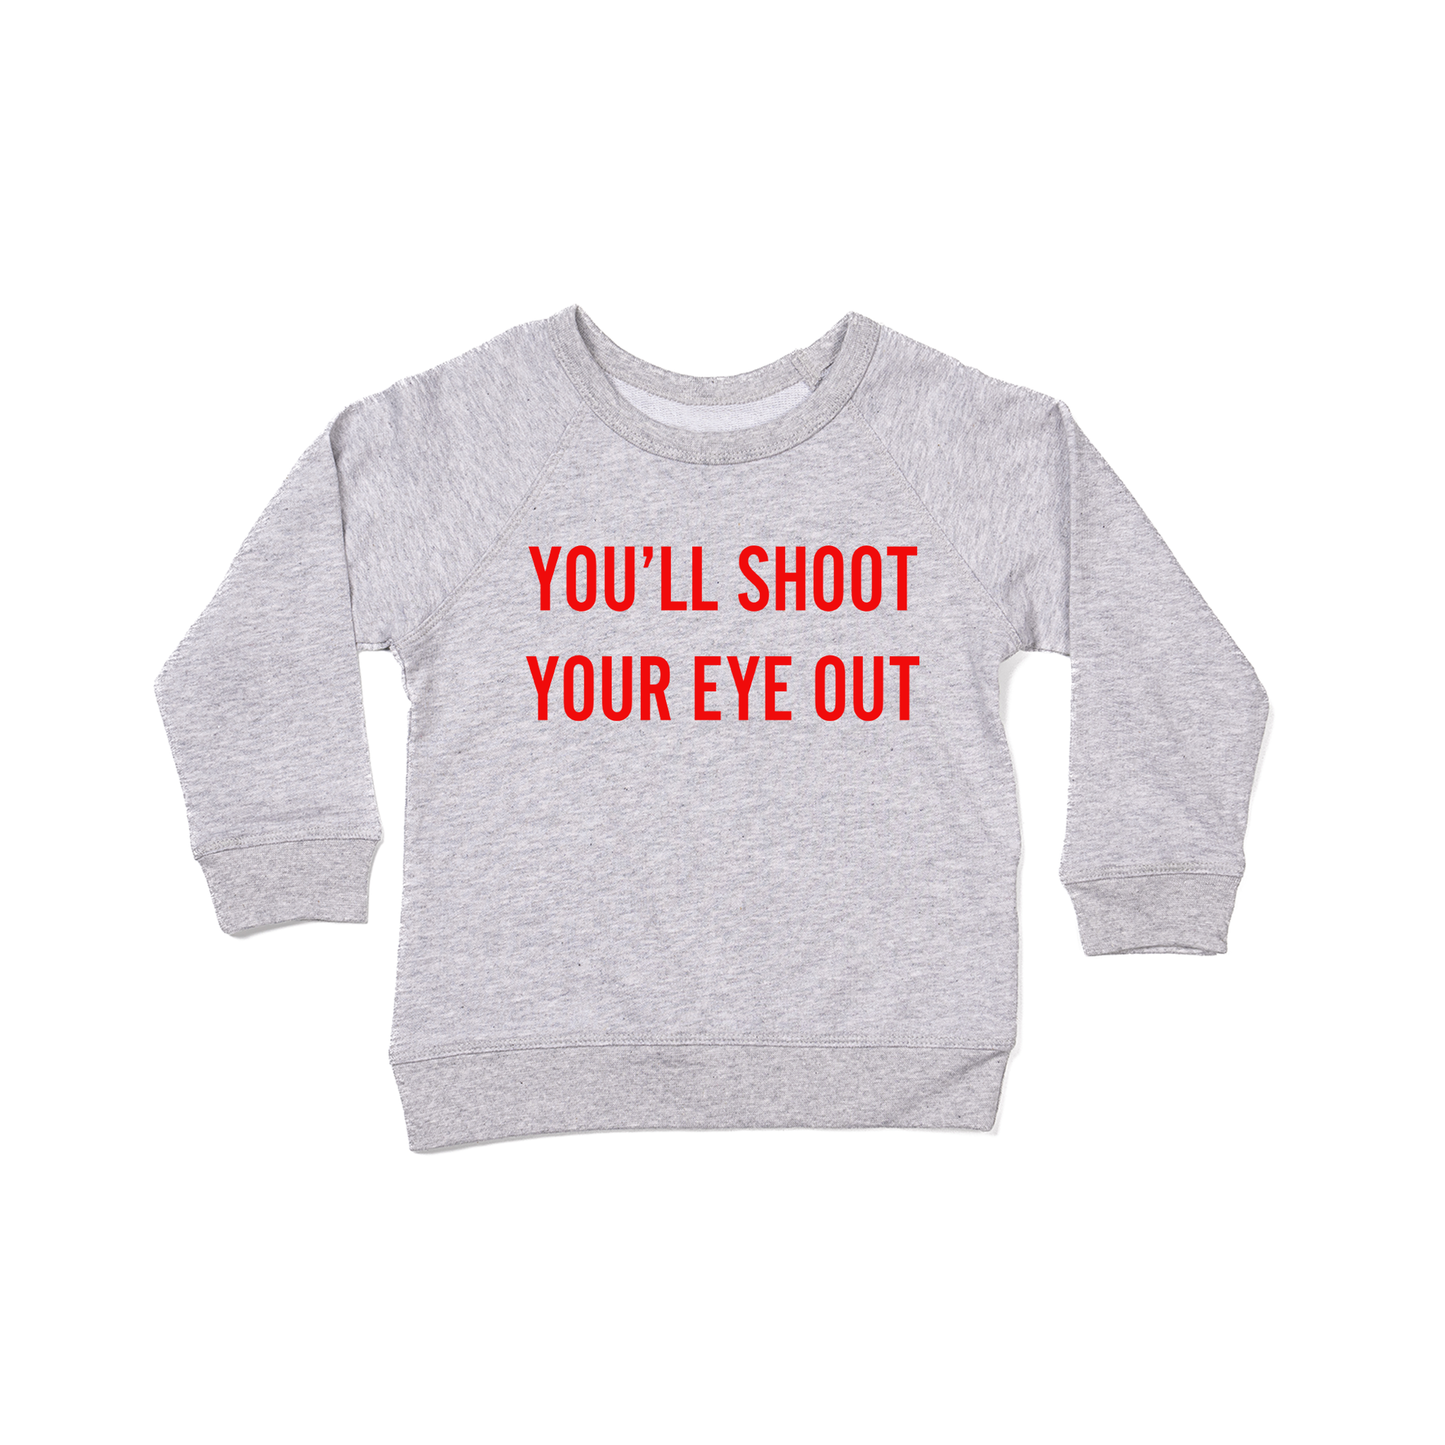 You'll Shoot Your Eye Out (Red) - Kids Sweatshirt (Heather Gray)